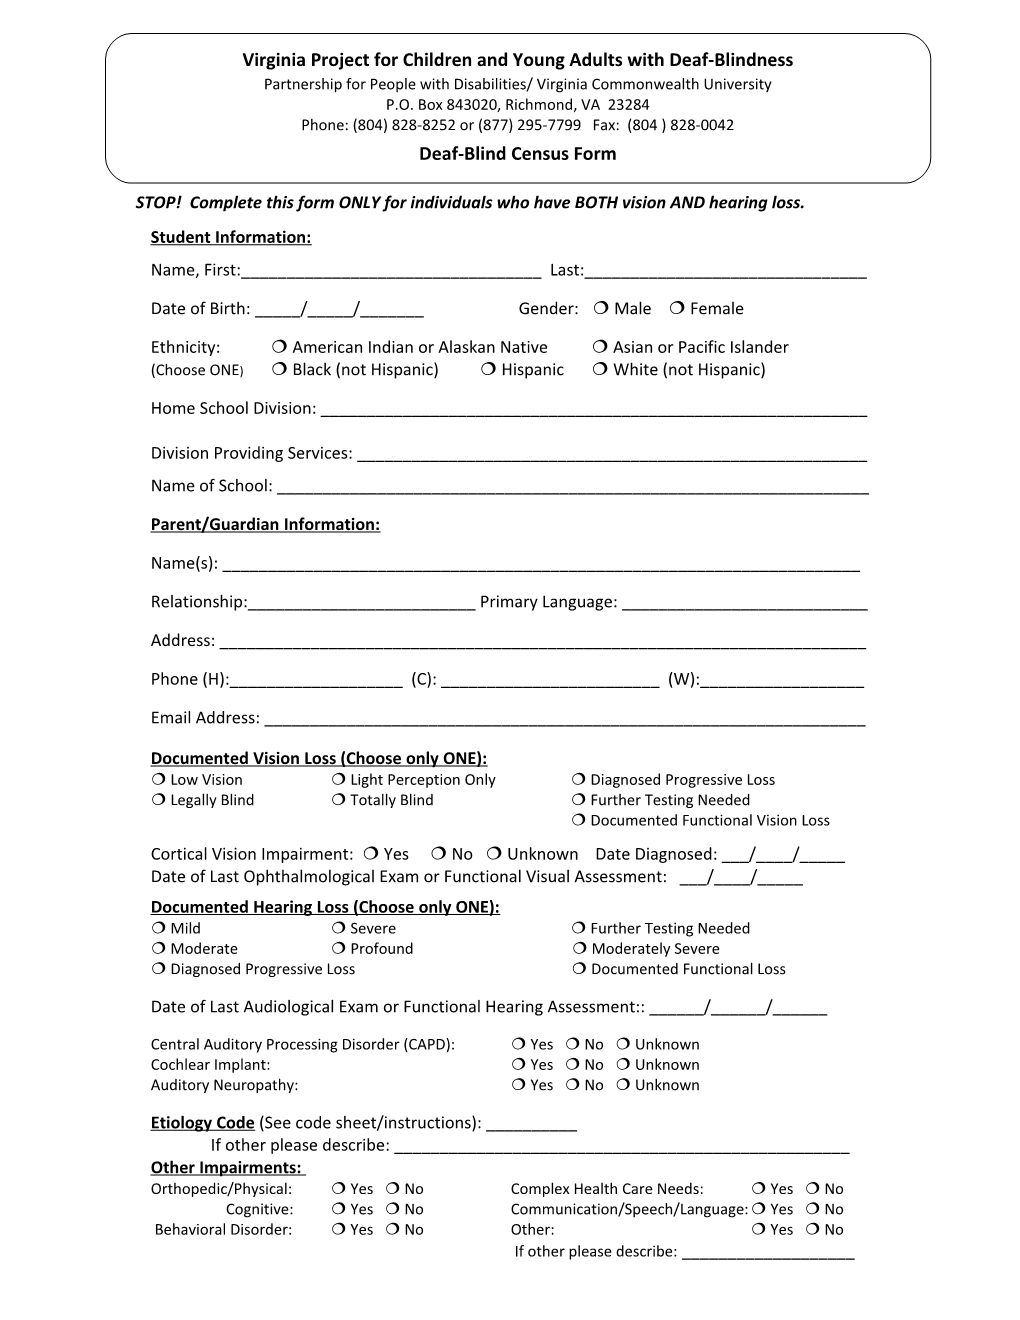 STOP! Complete This Form ONLY for Individuals Who Have Bothvision Andhearing Loss